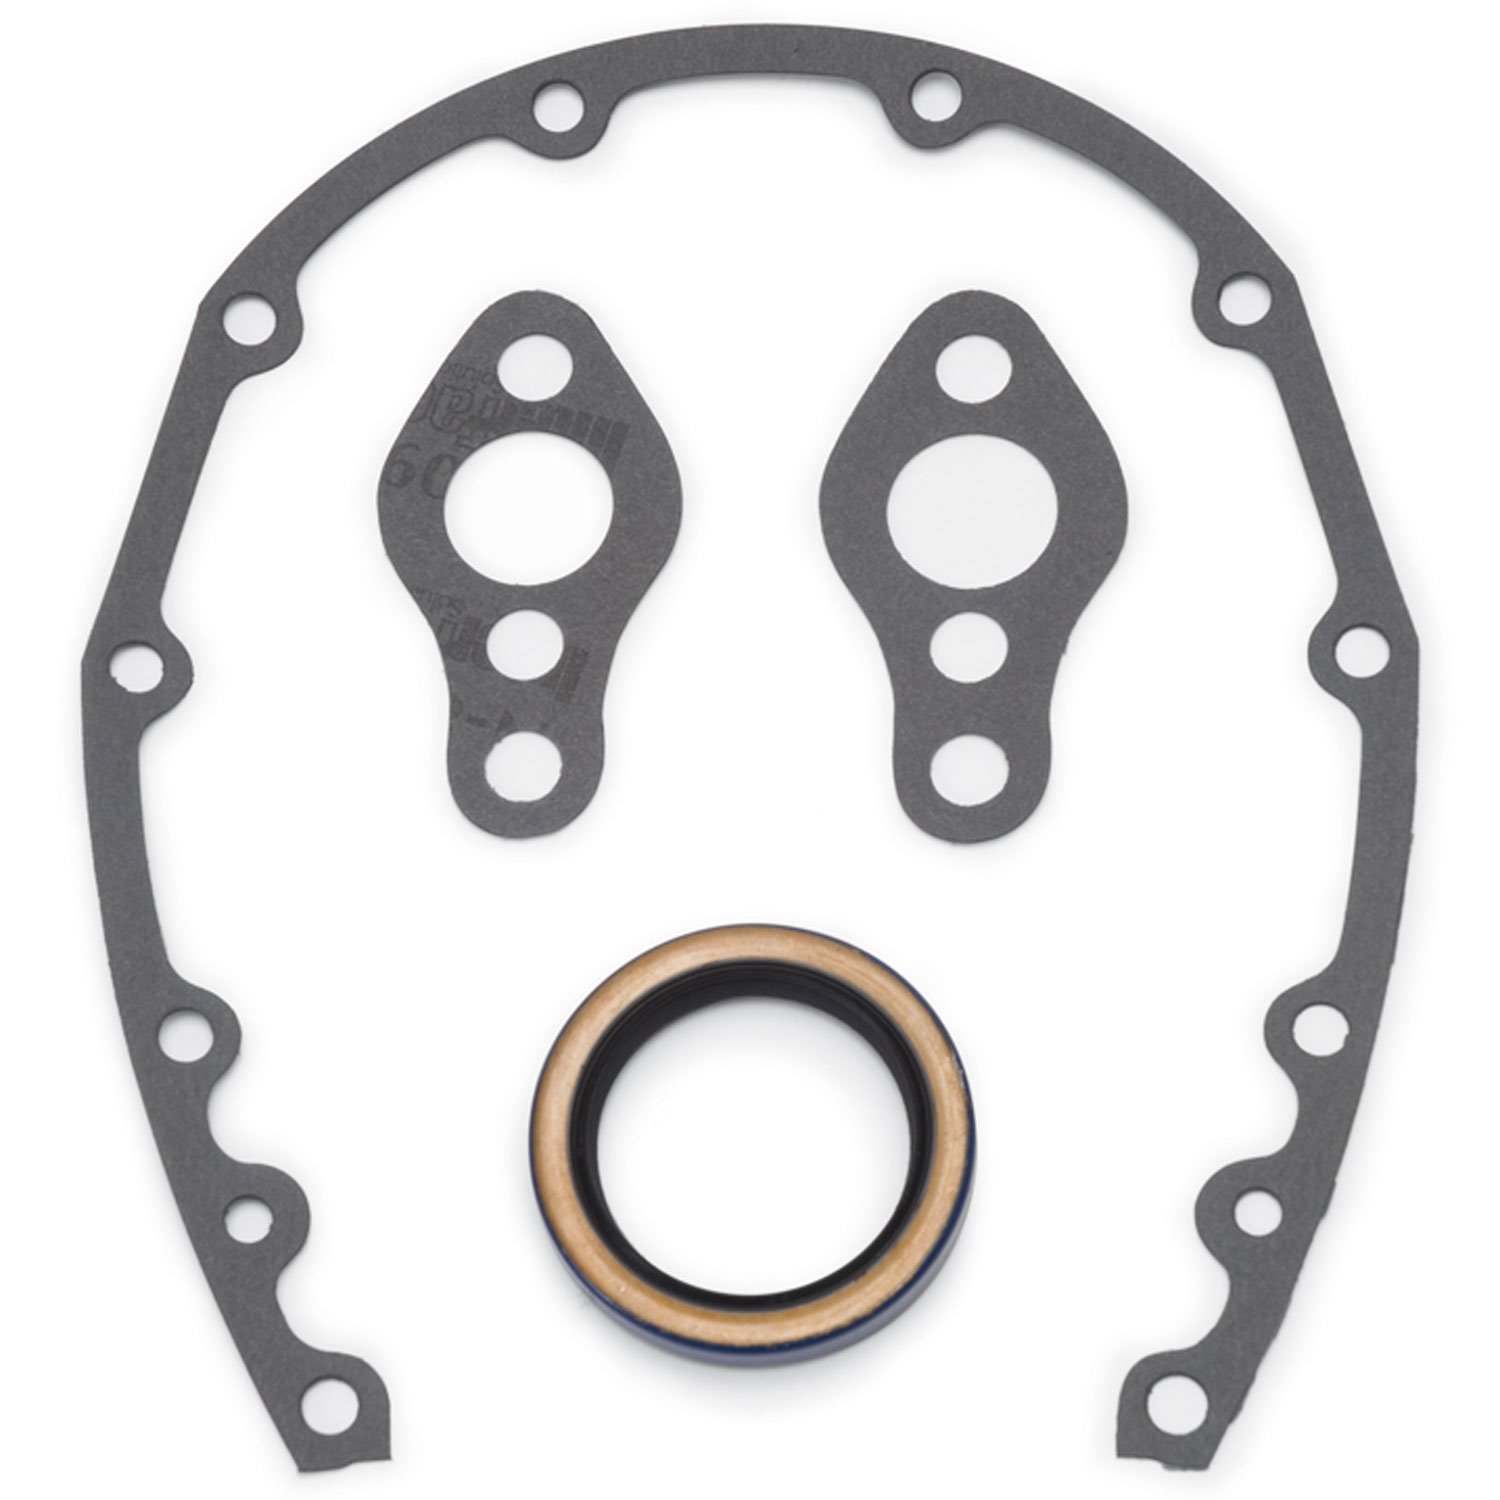 Timing Cover Gasket and Seal for Small Block Chevy